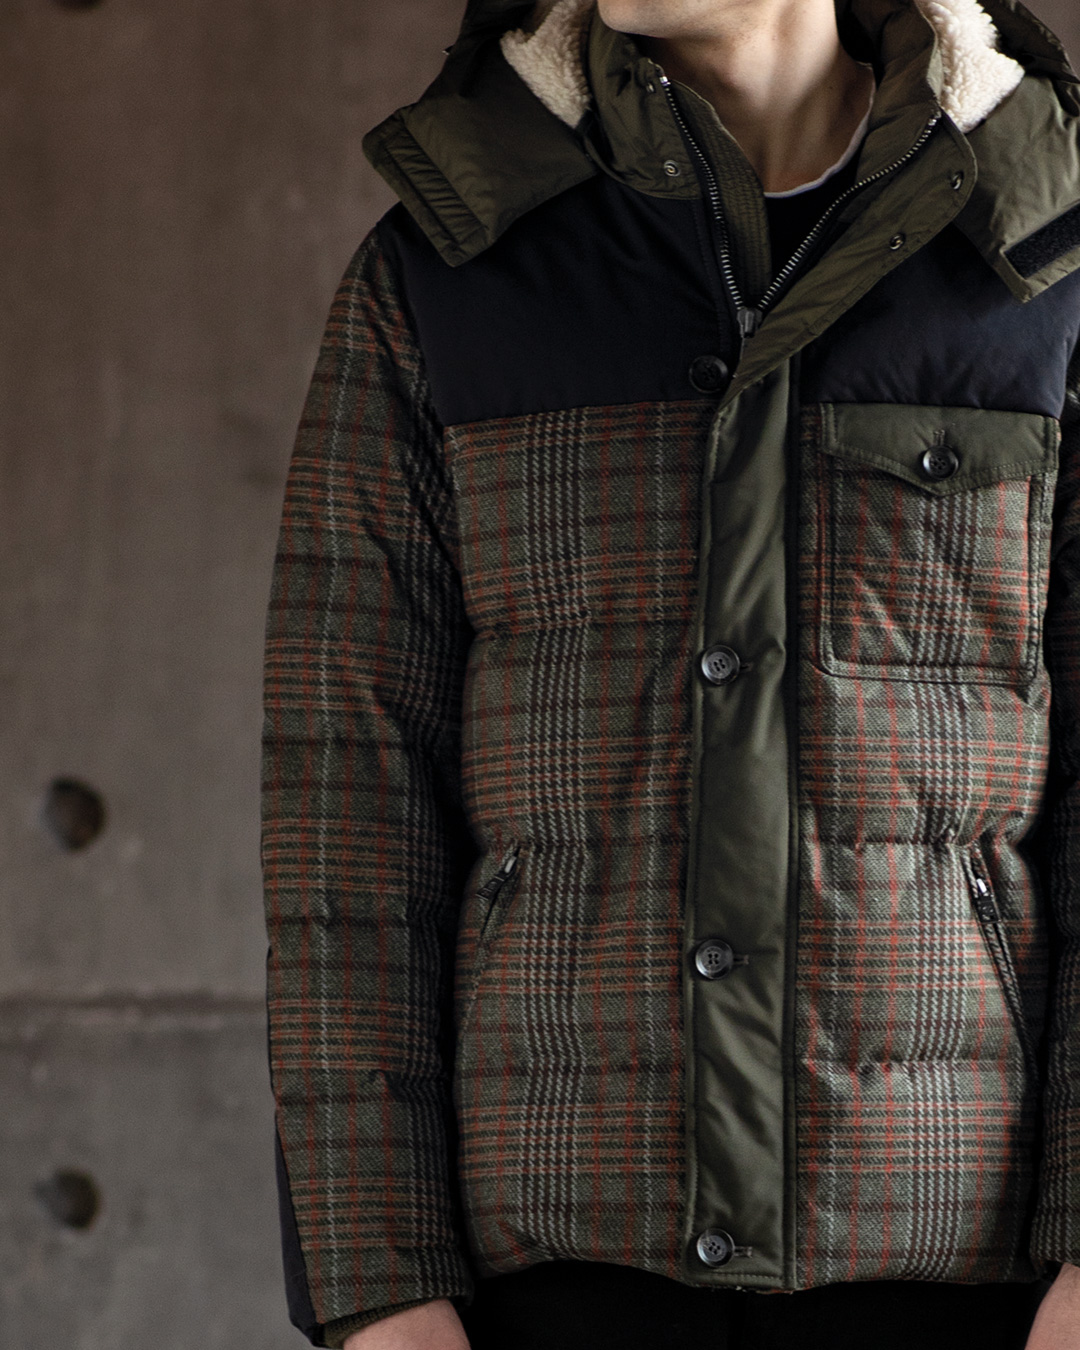 Adhoc - A closer view of our Checked Down Jacket.

#adhoc #man #formovingpeople #alwaysreadytowear #manstyle #urban #lifestyle #style #traveling #travels #traveler #fw19